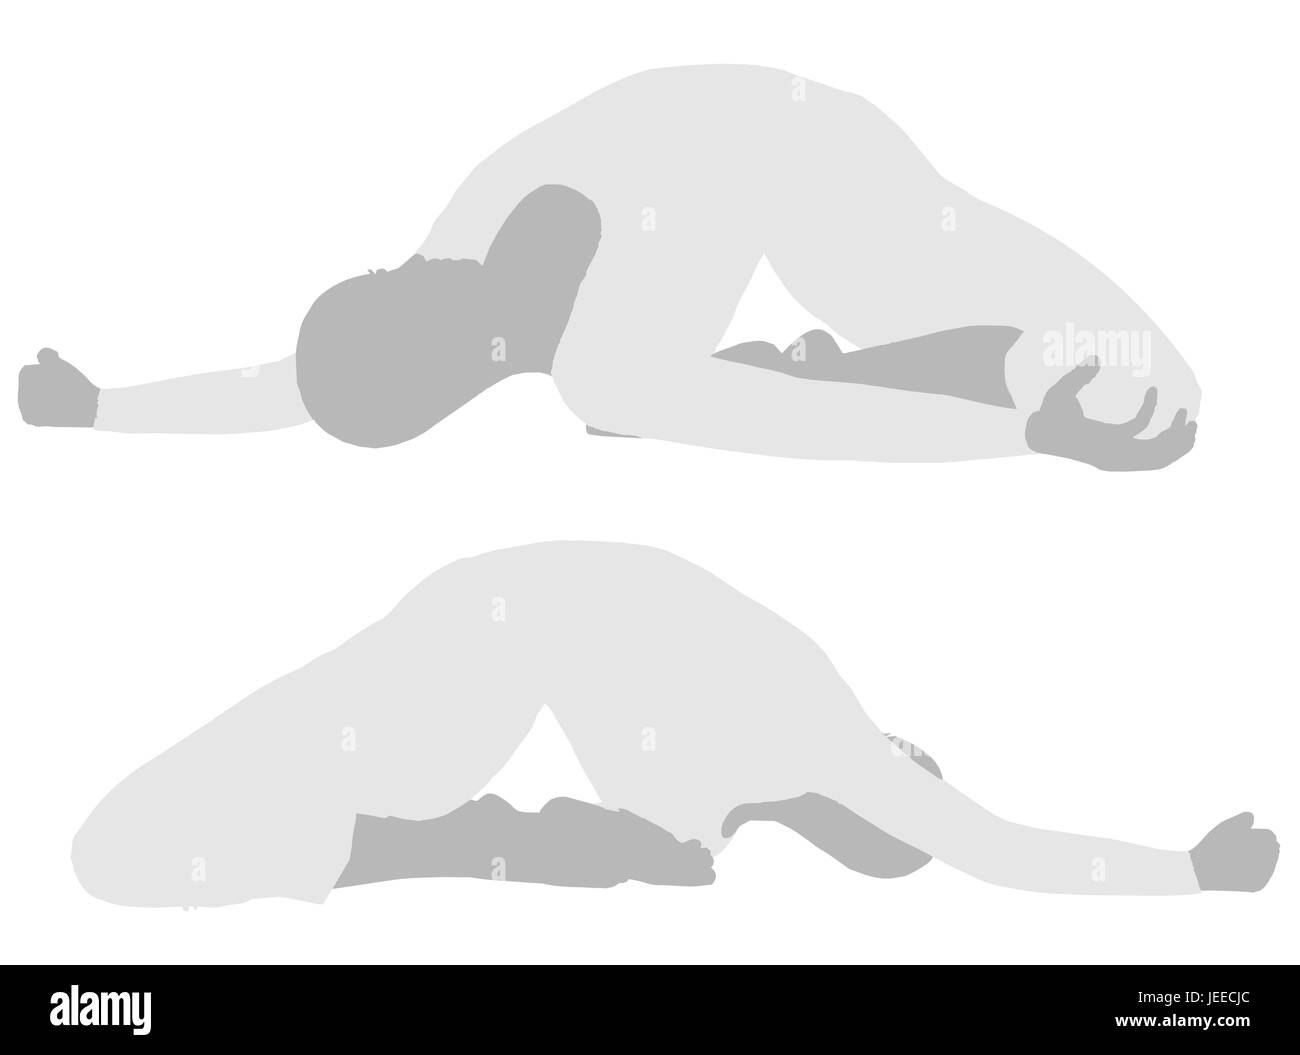 EPS 10 vector illustration of woman silhouette in Collapsed Backwards Pose Stock Vector